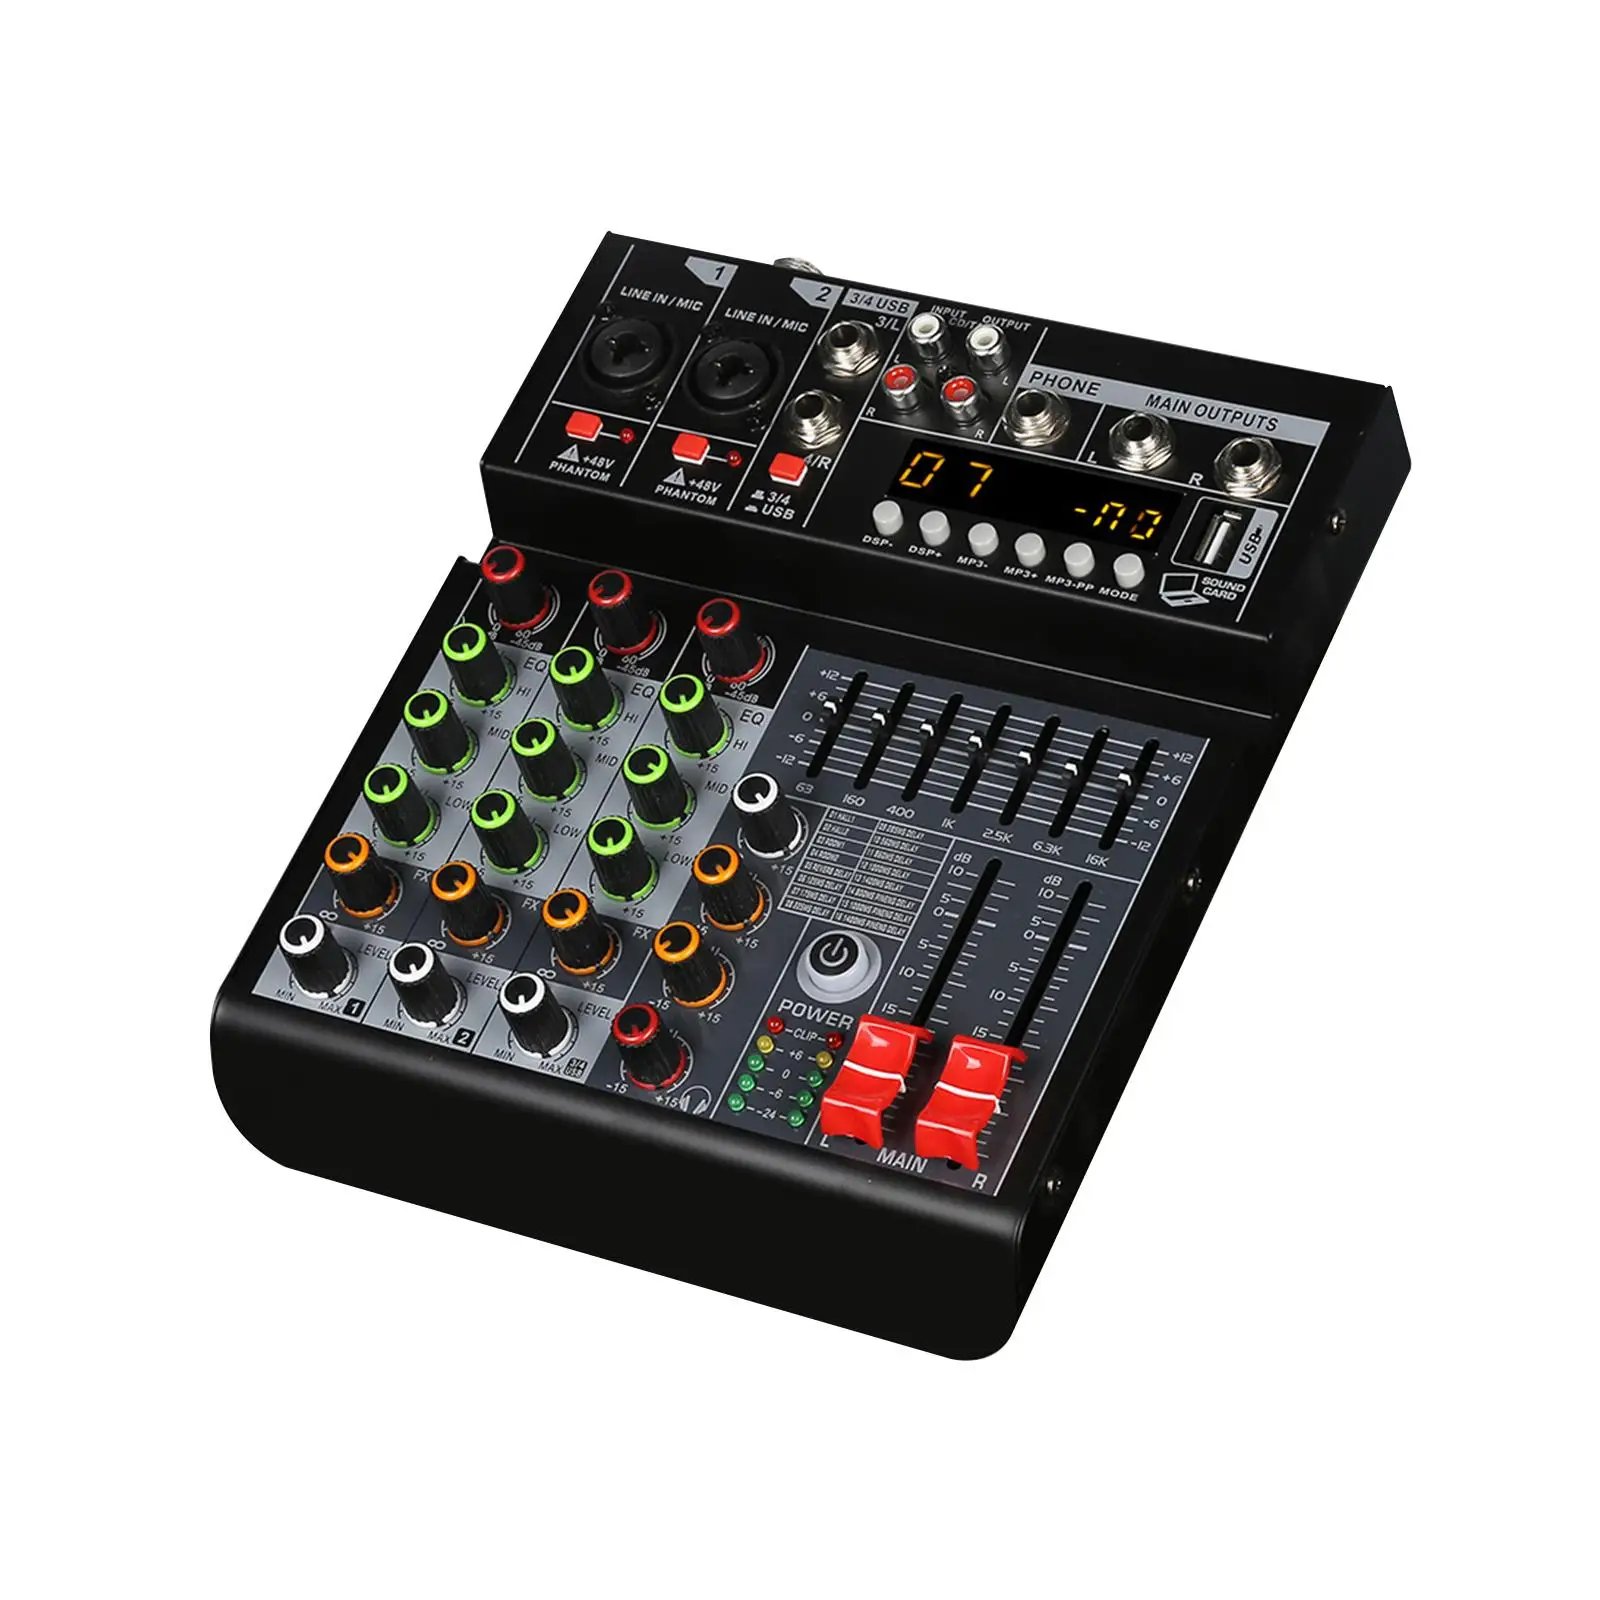 4 Channels Audio Mixer Digital Mixer 2 Channel Stereo Input USB 385x300x90mm for PC Recording Input Stable Transmission EU Plug